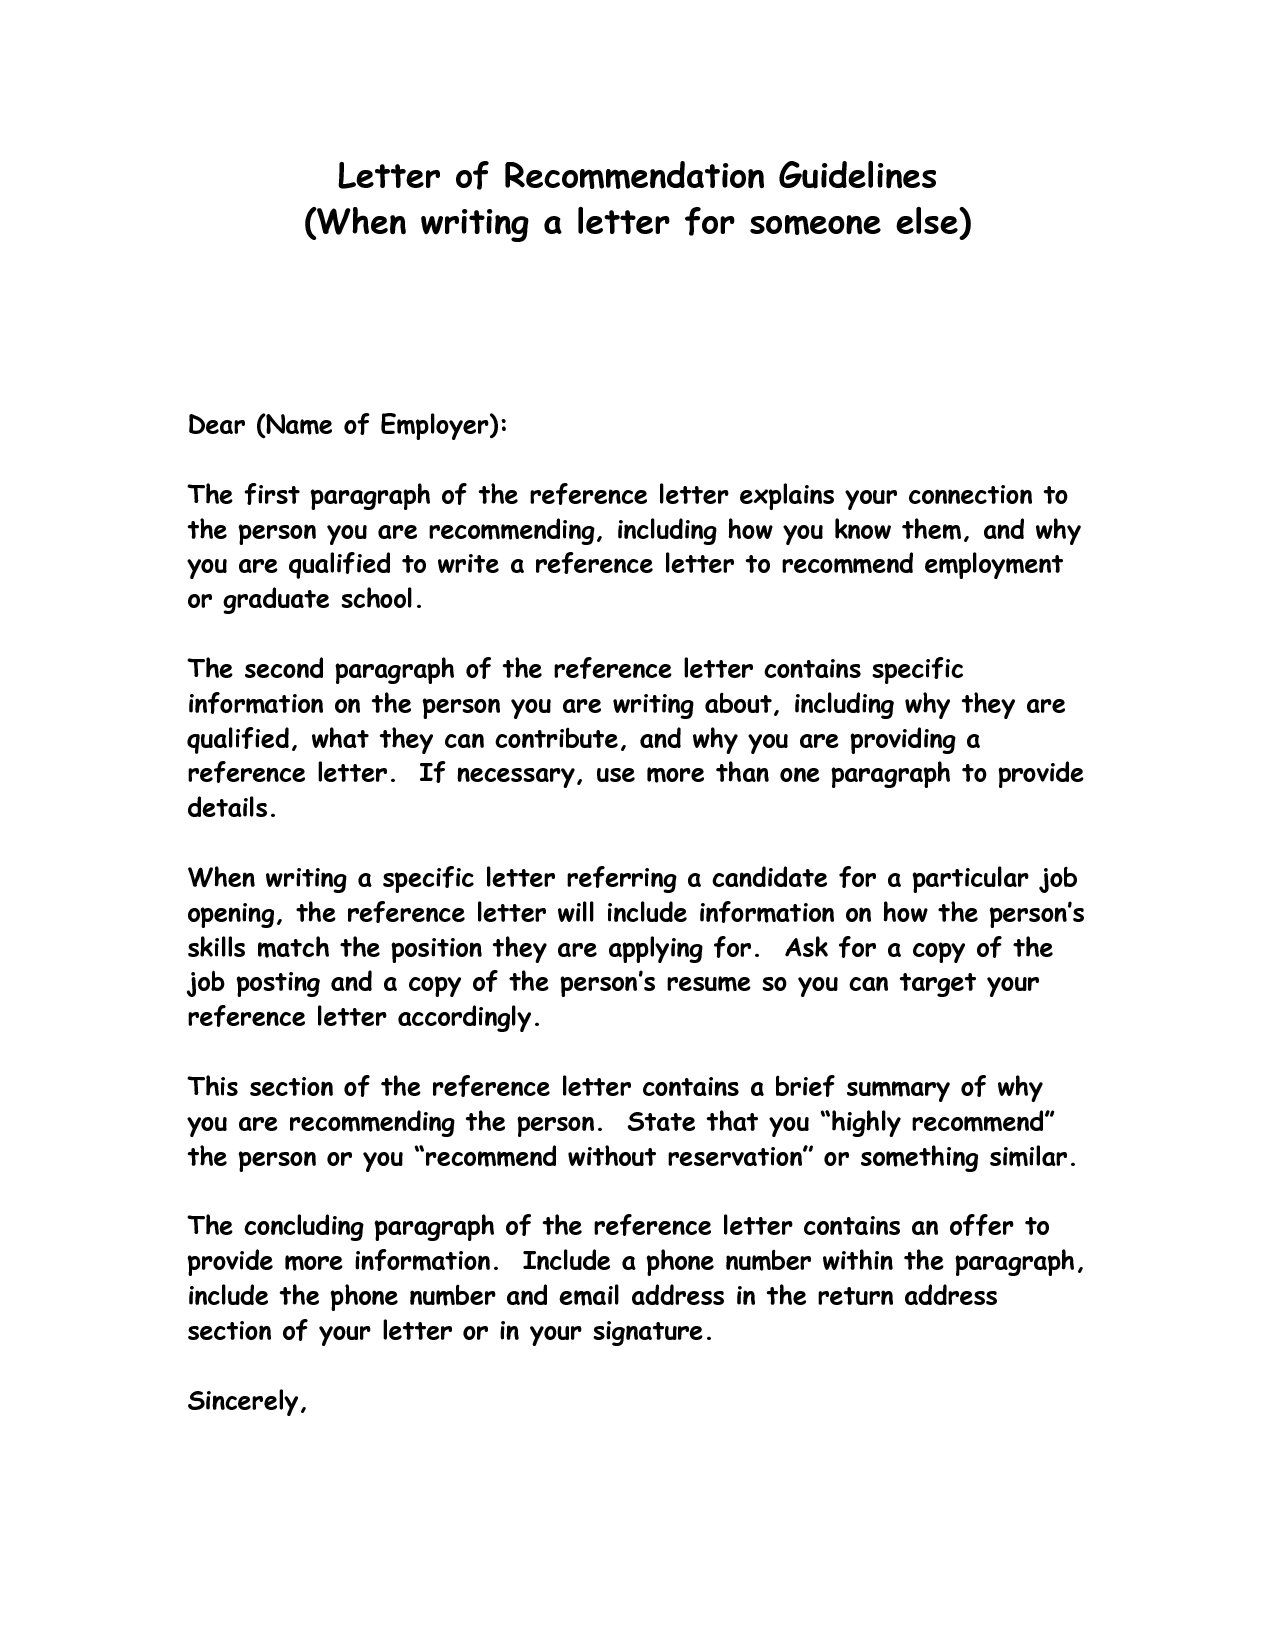 How To Write A Reference Letter | Letter | letter example 